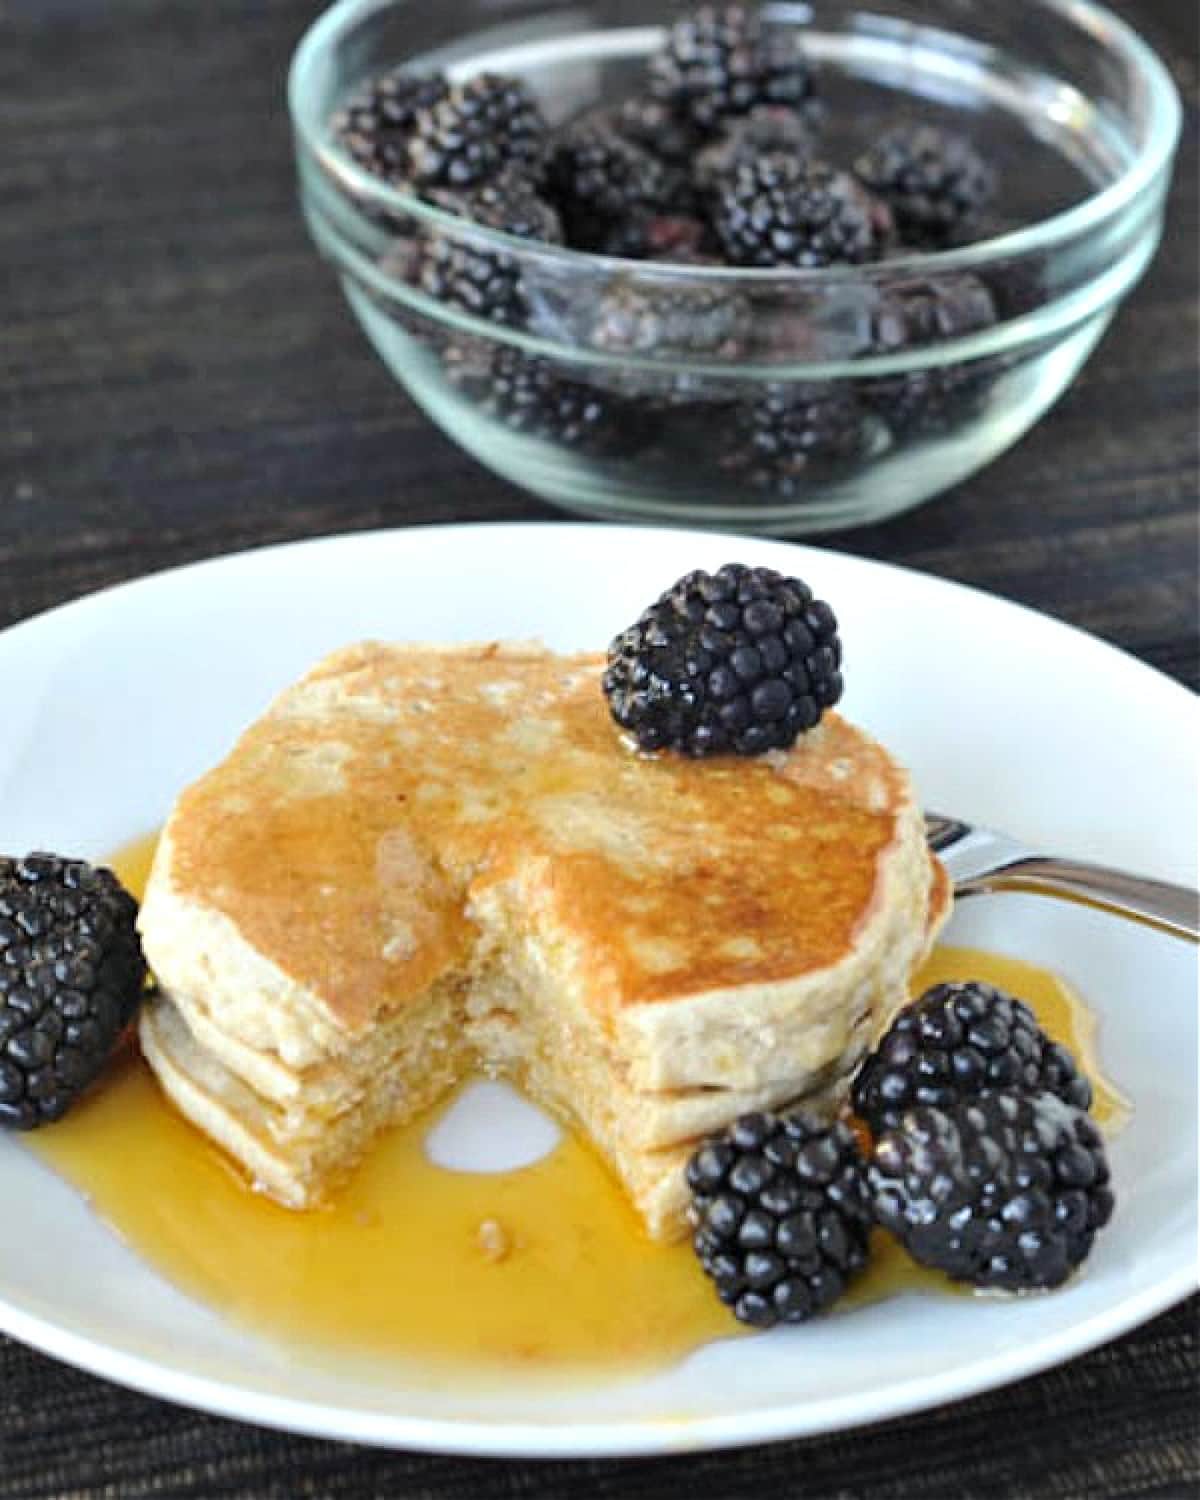 Buckwheat banana pancakes with fresh blackberries and syrup, on a plate with one bite sliced out.